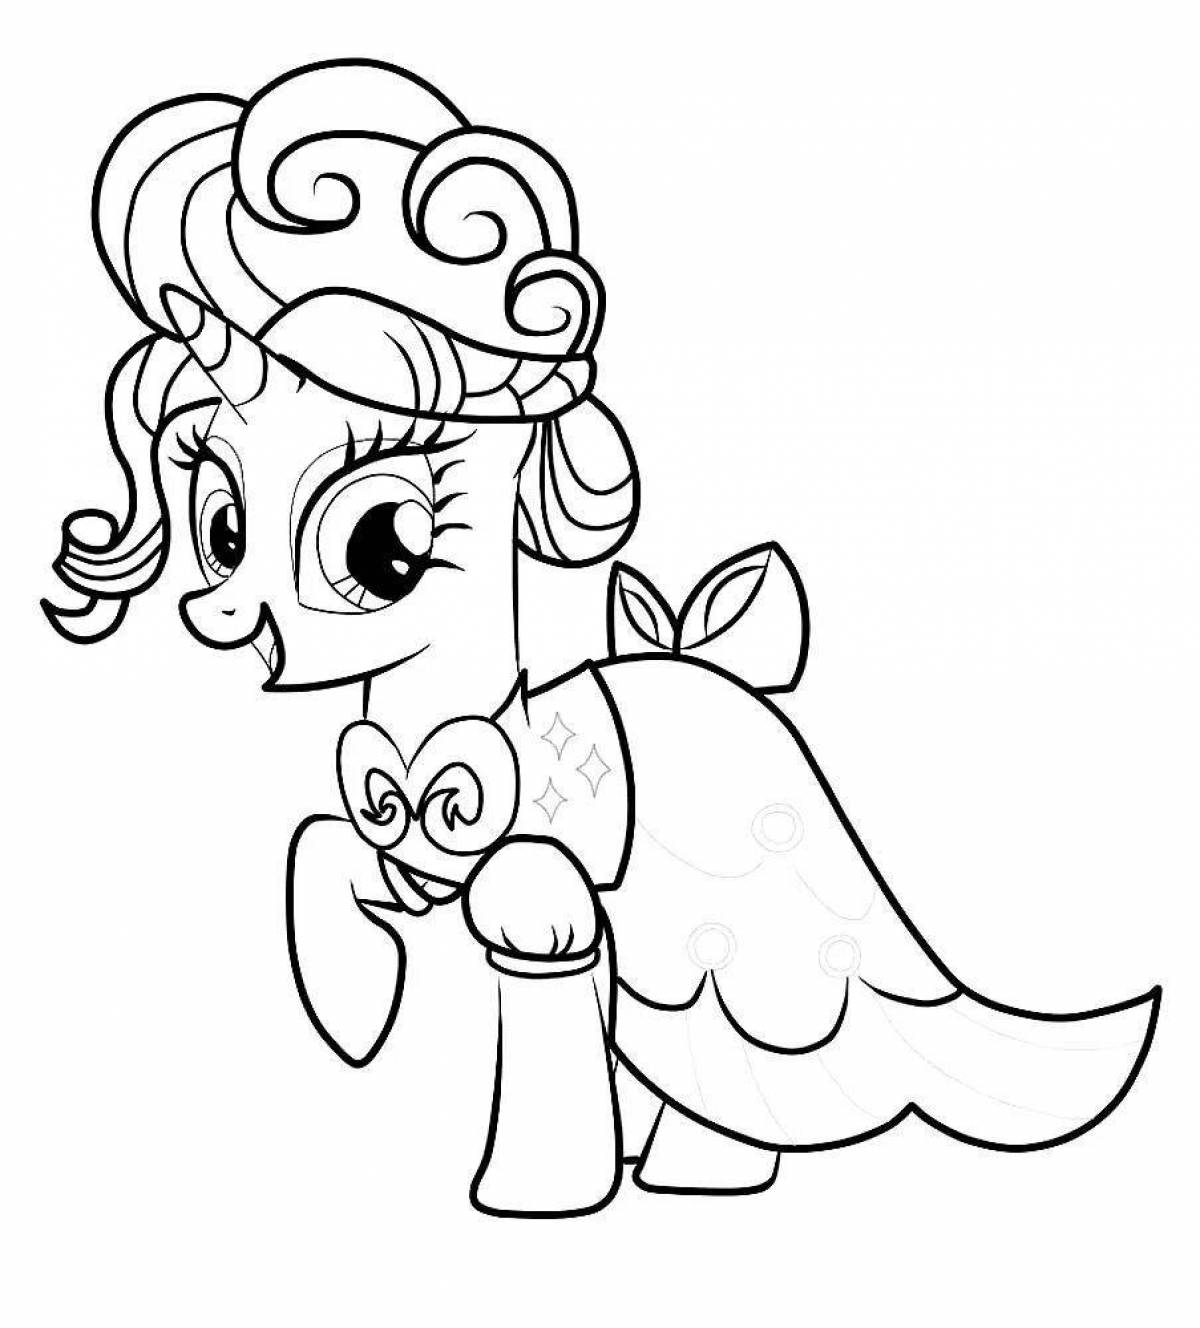 Rarity Pony Mystery Coloring Page